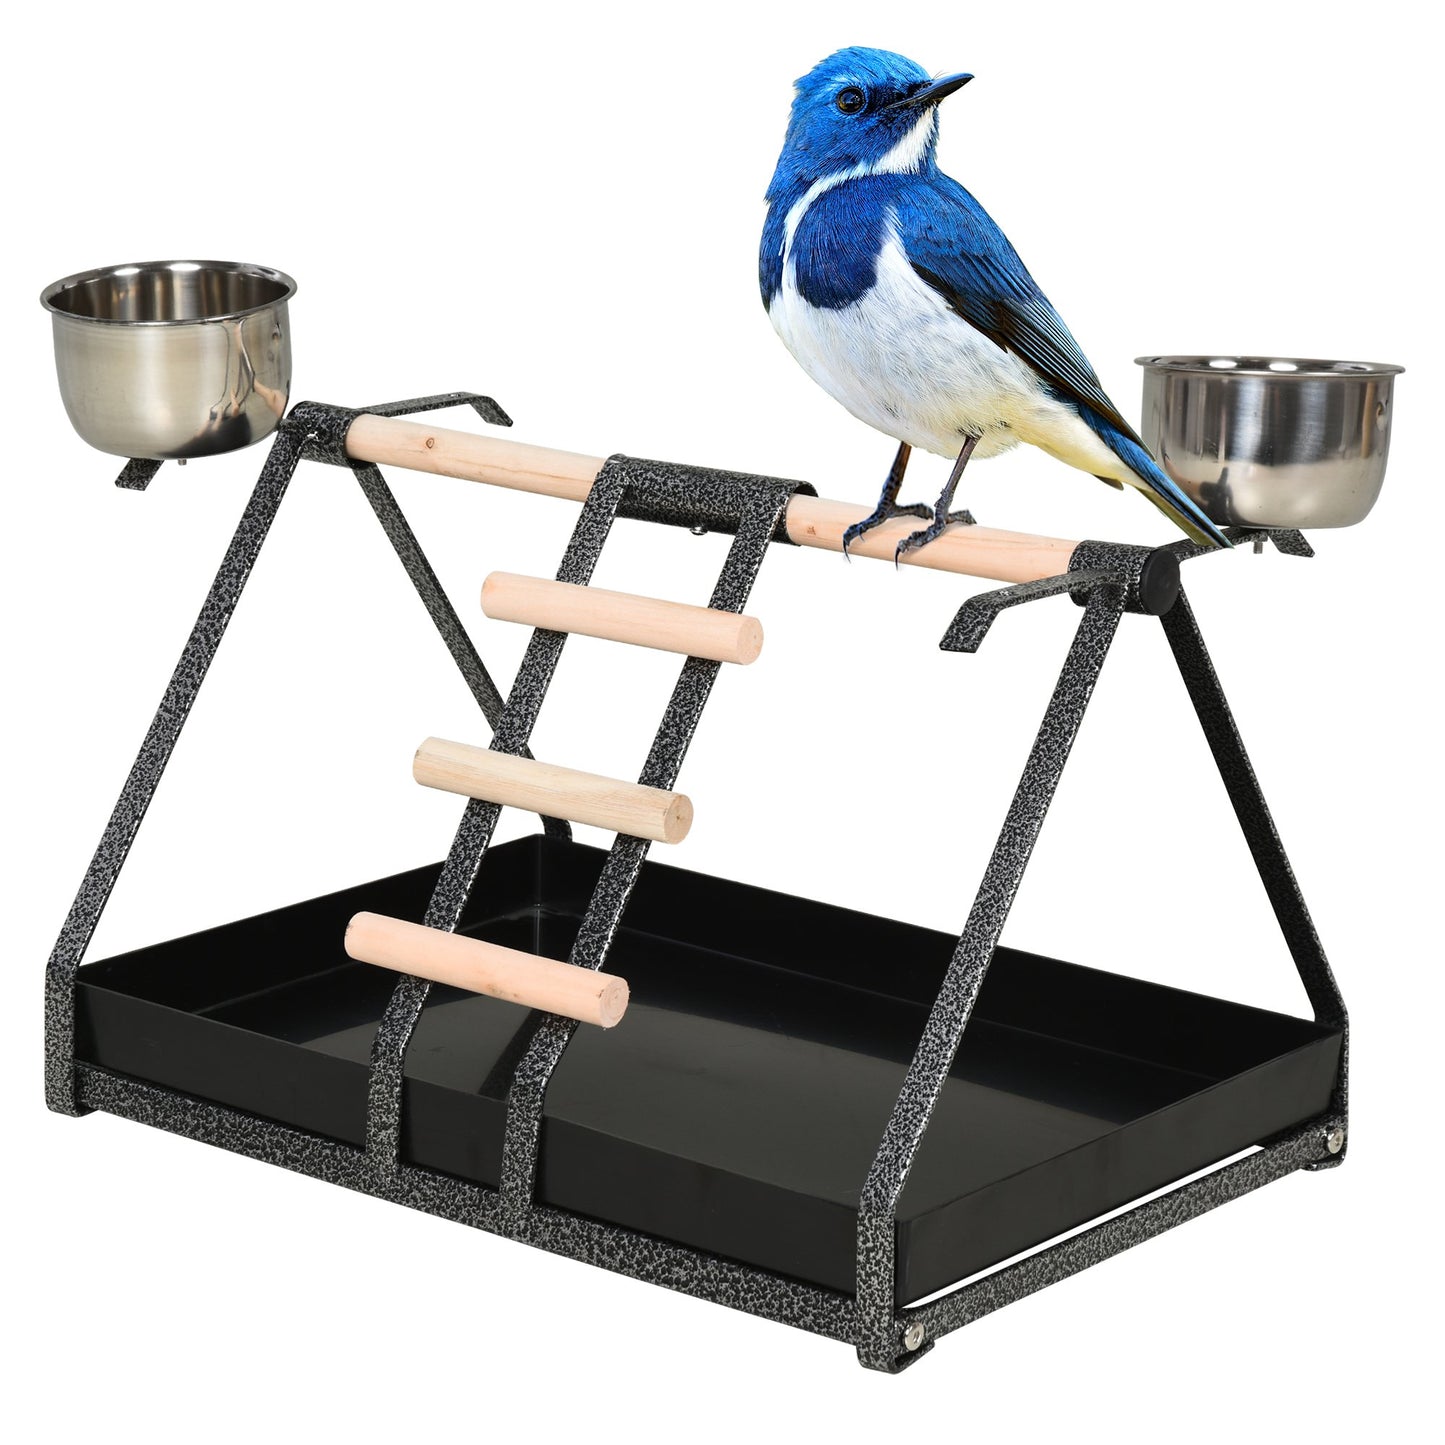 PawHut Portable Parrot Bird Stainless Steel Feeder w/ Fir Wood Perch Removable Tray